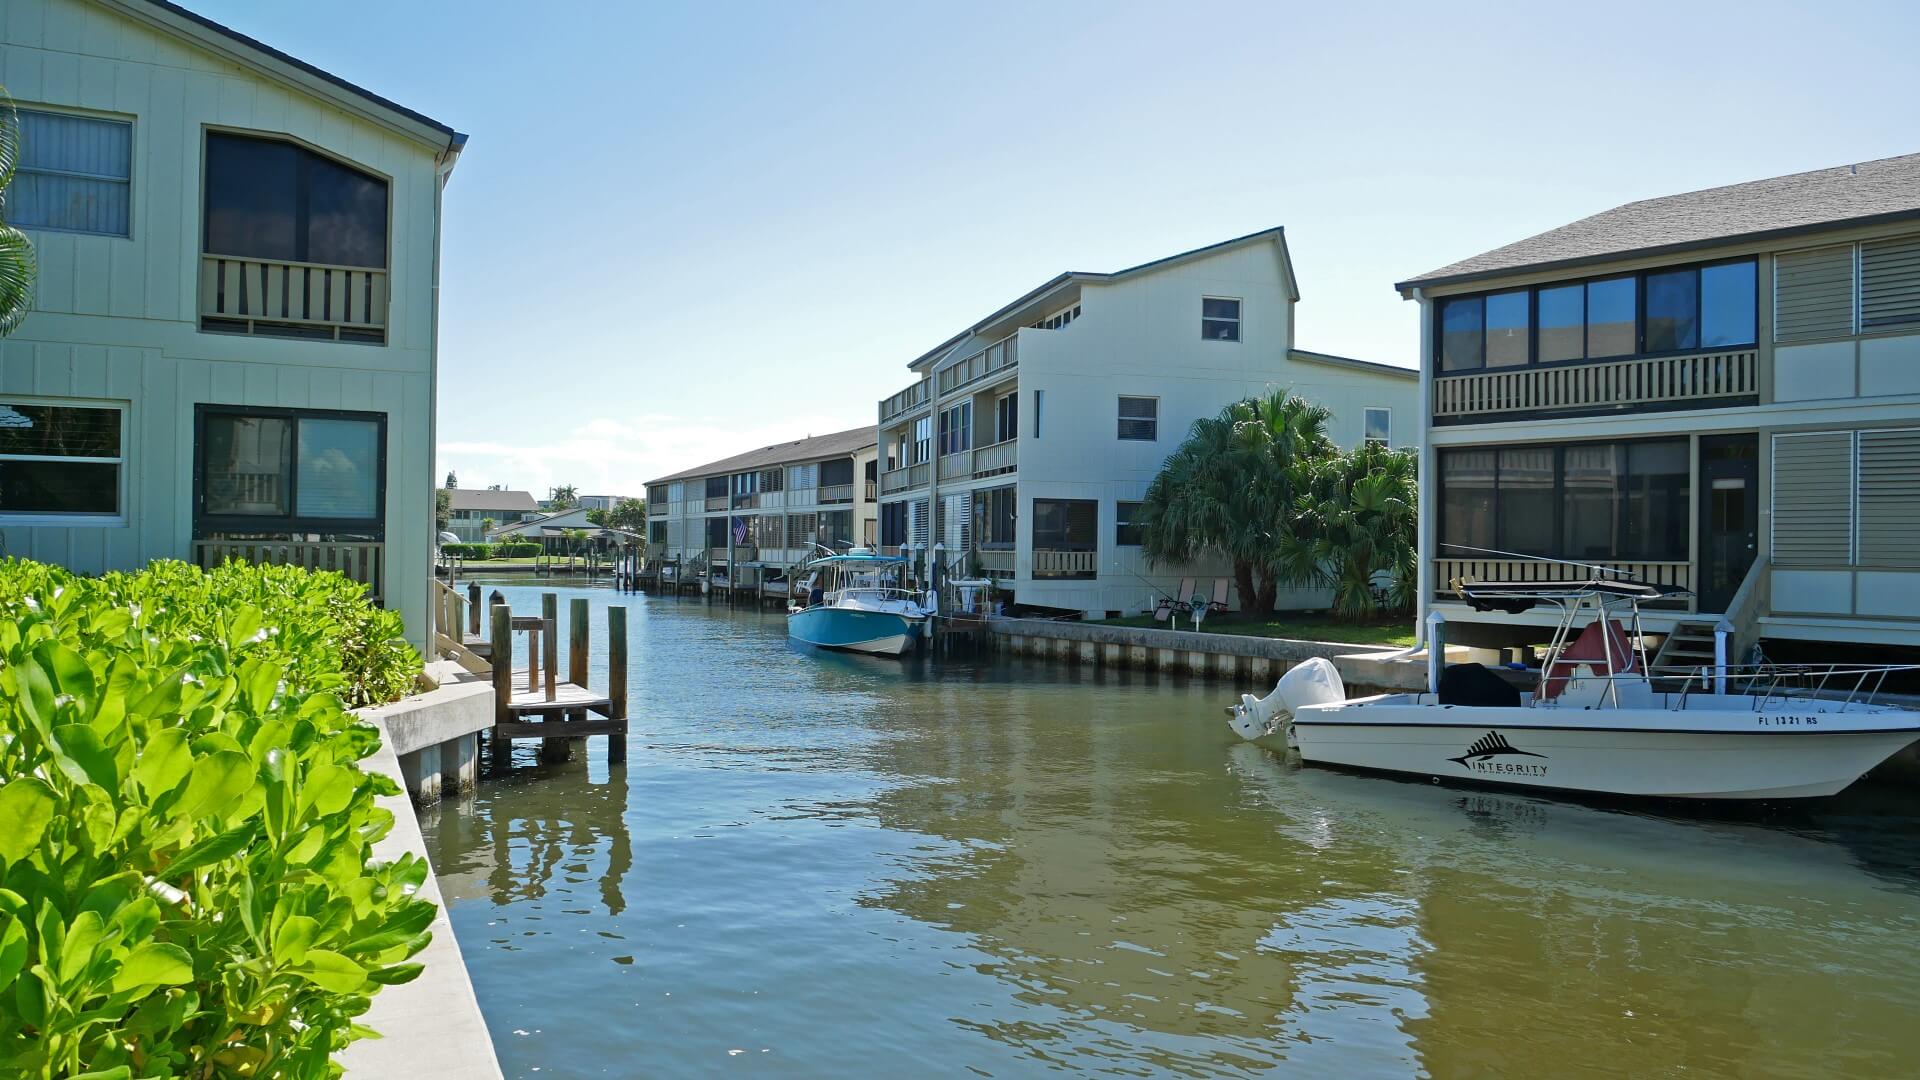 Anglers Cove Condo With Ocean Access Dock Sold ⋆ Stuart